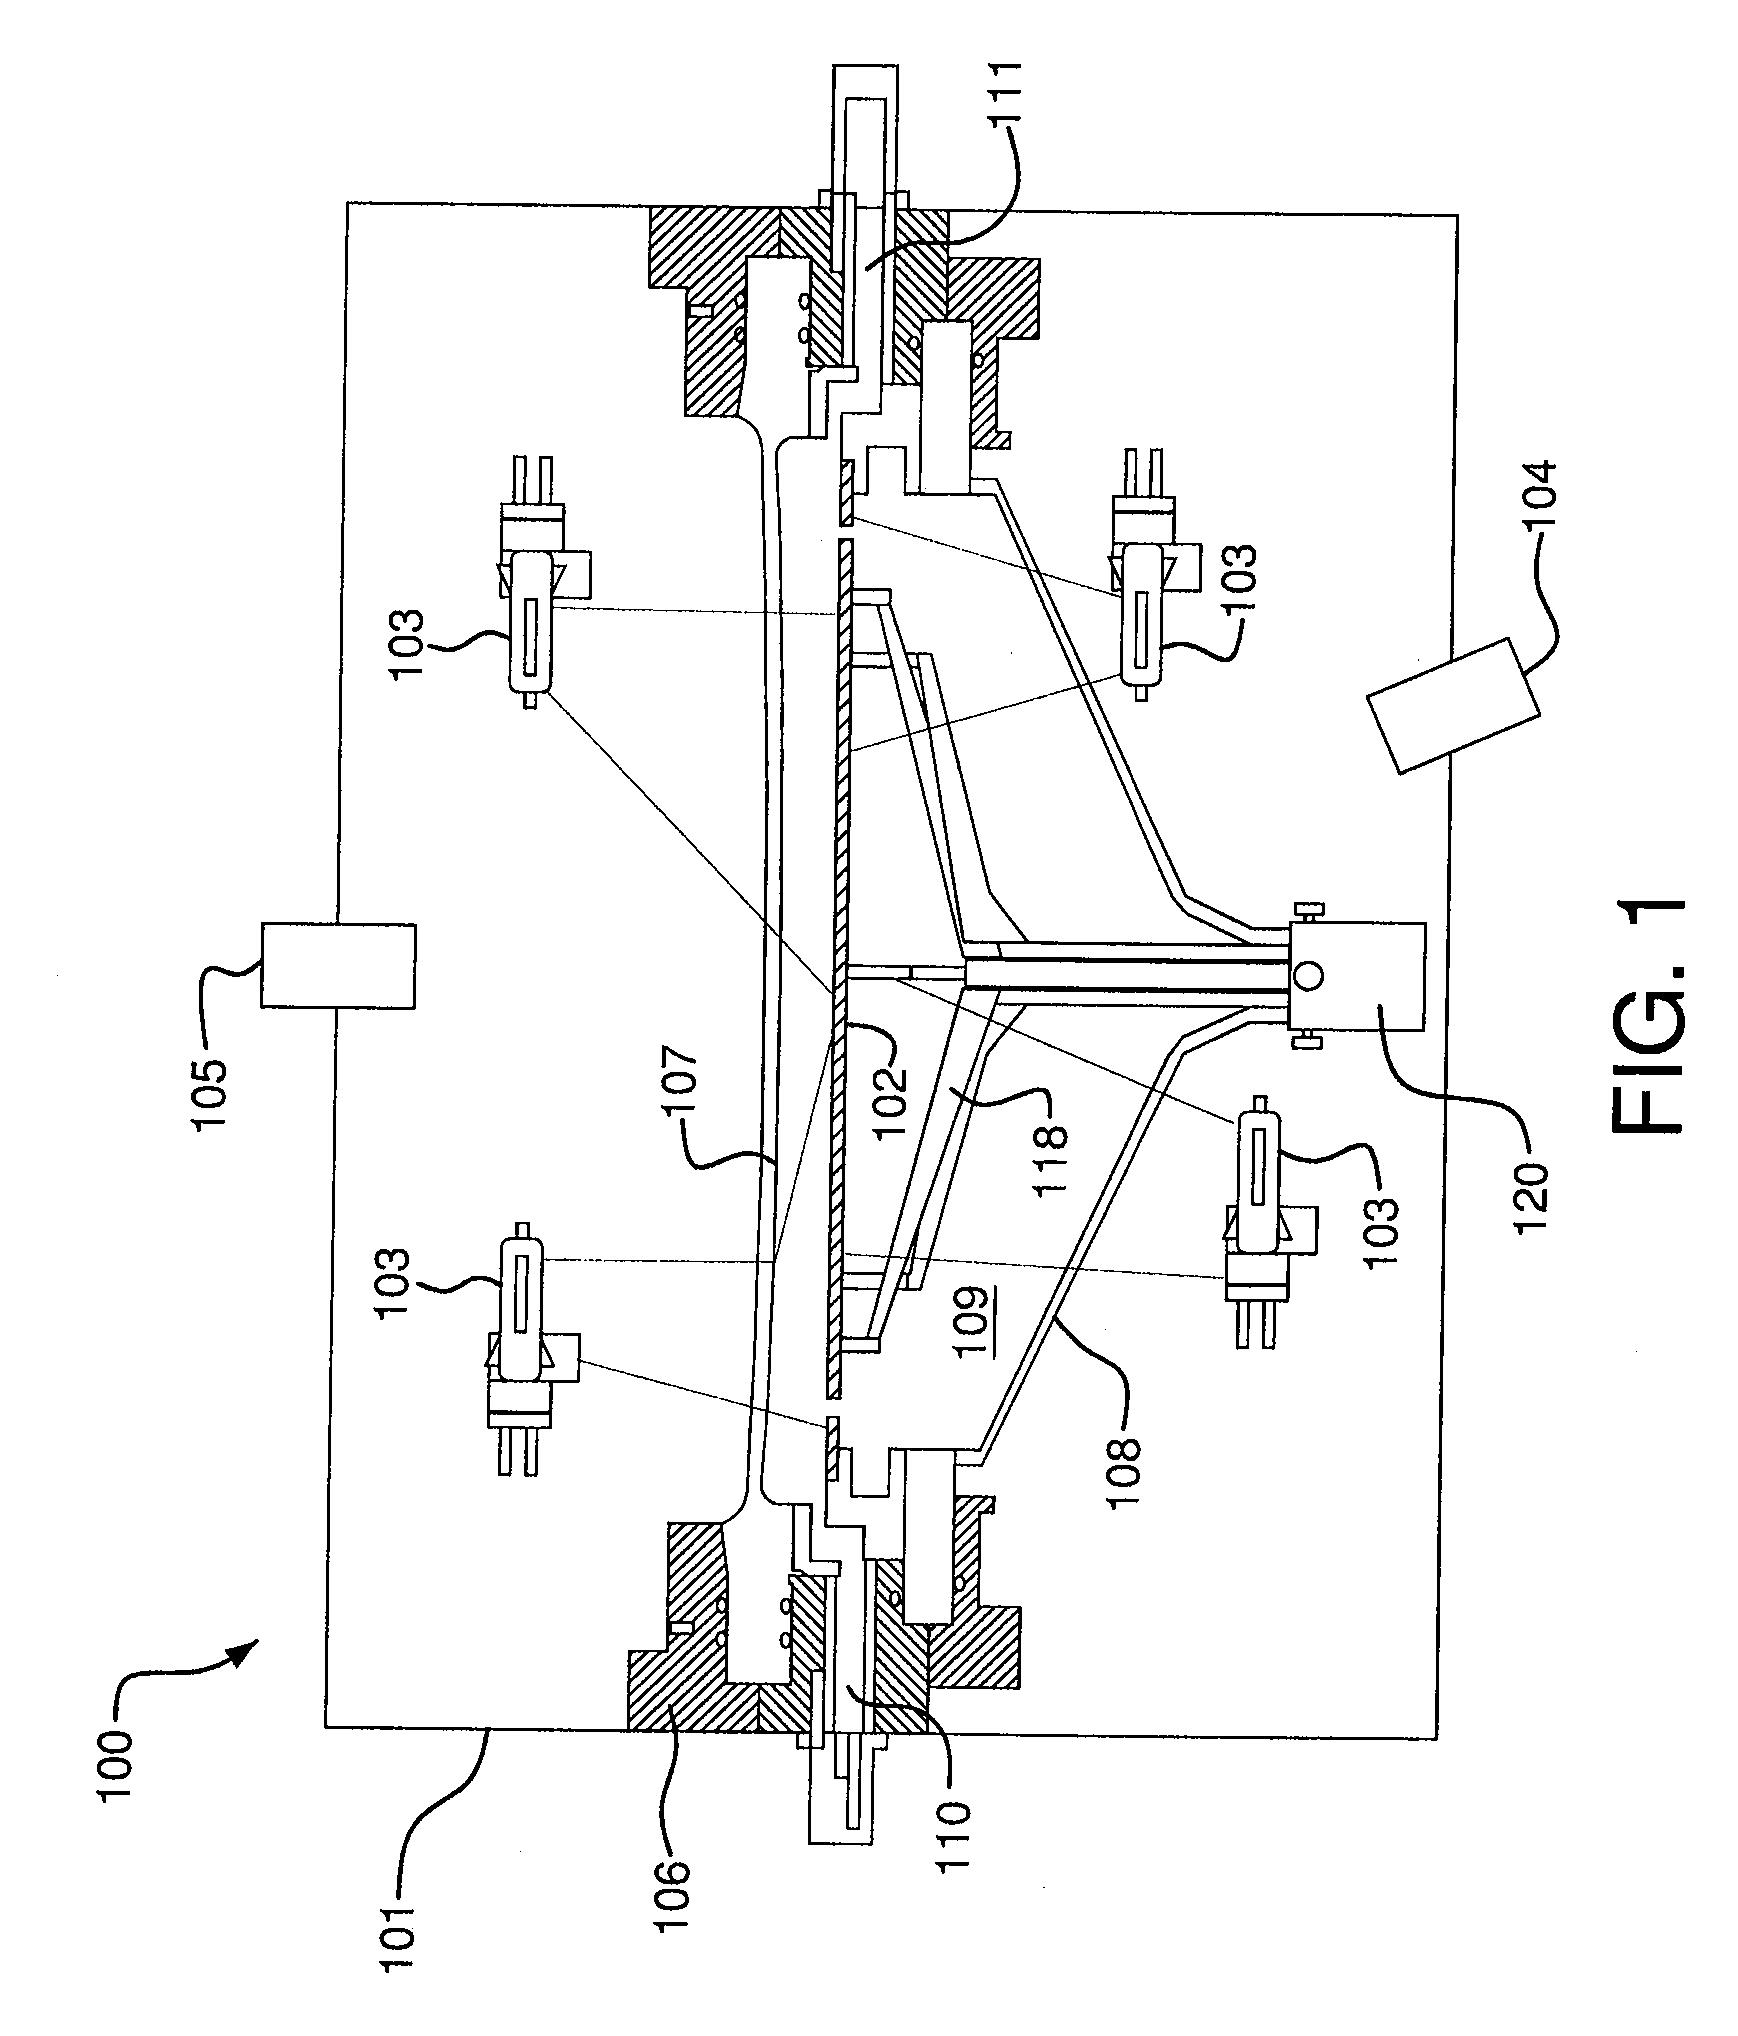 Semiconductor process chamber vision and monitoring system